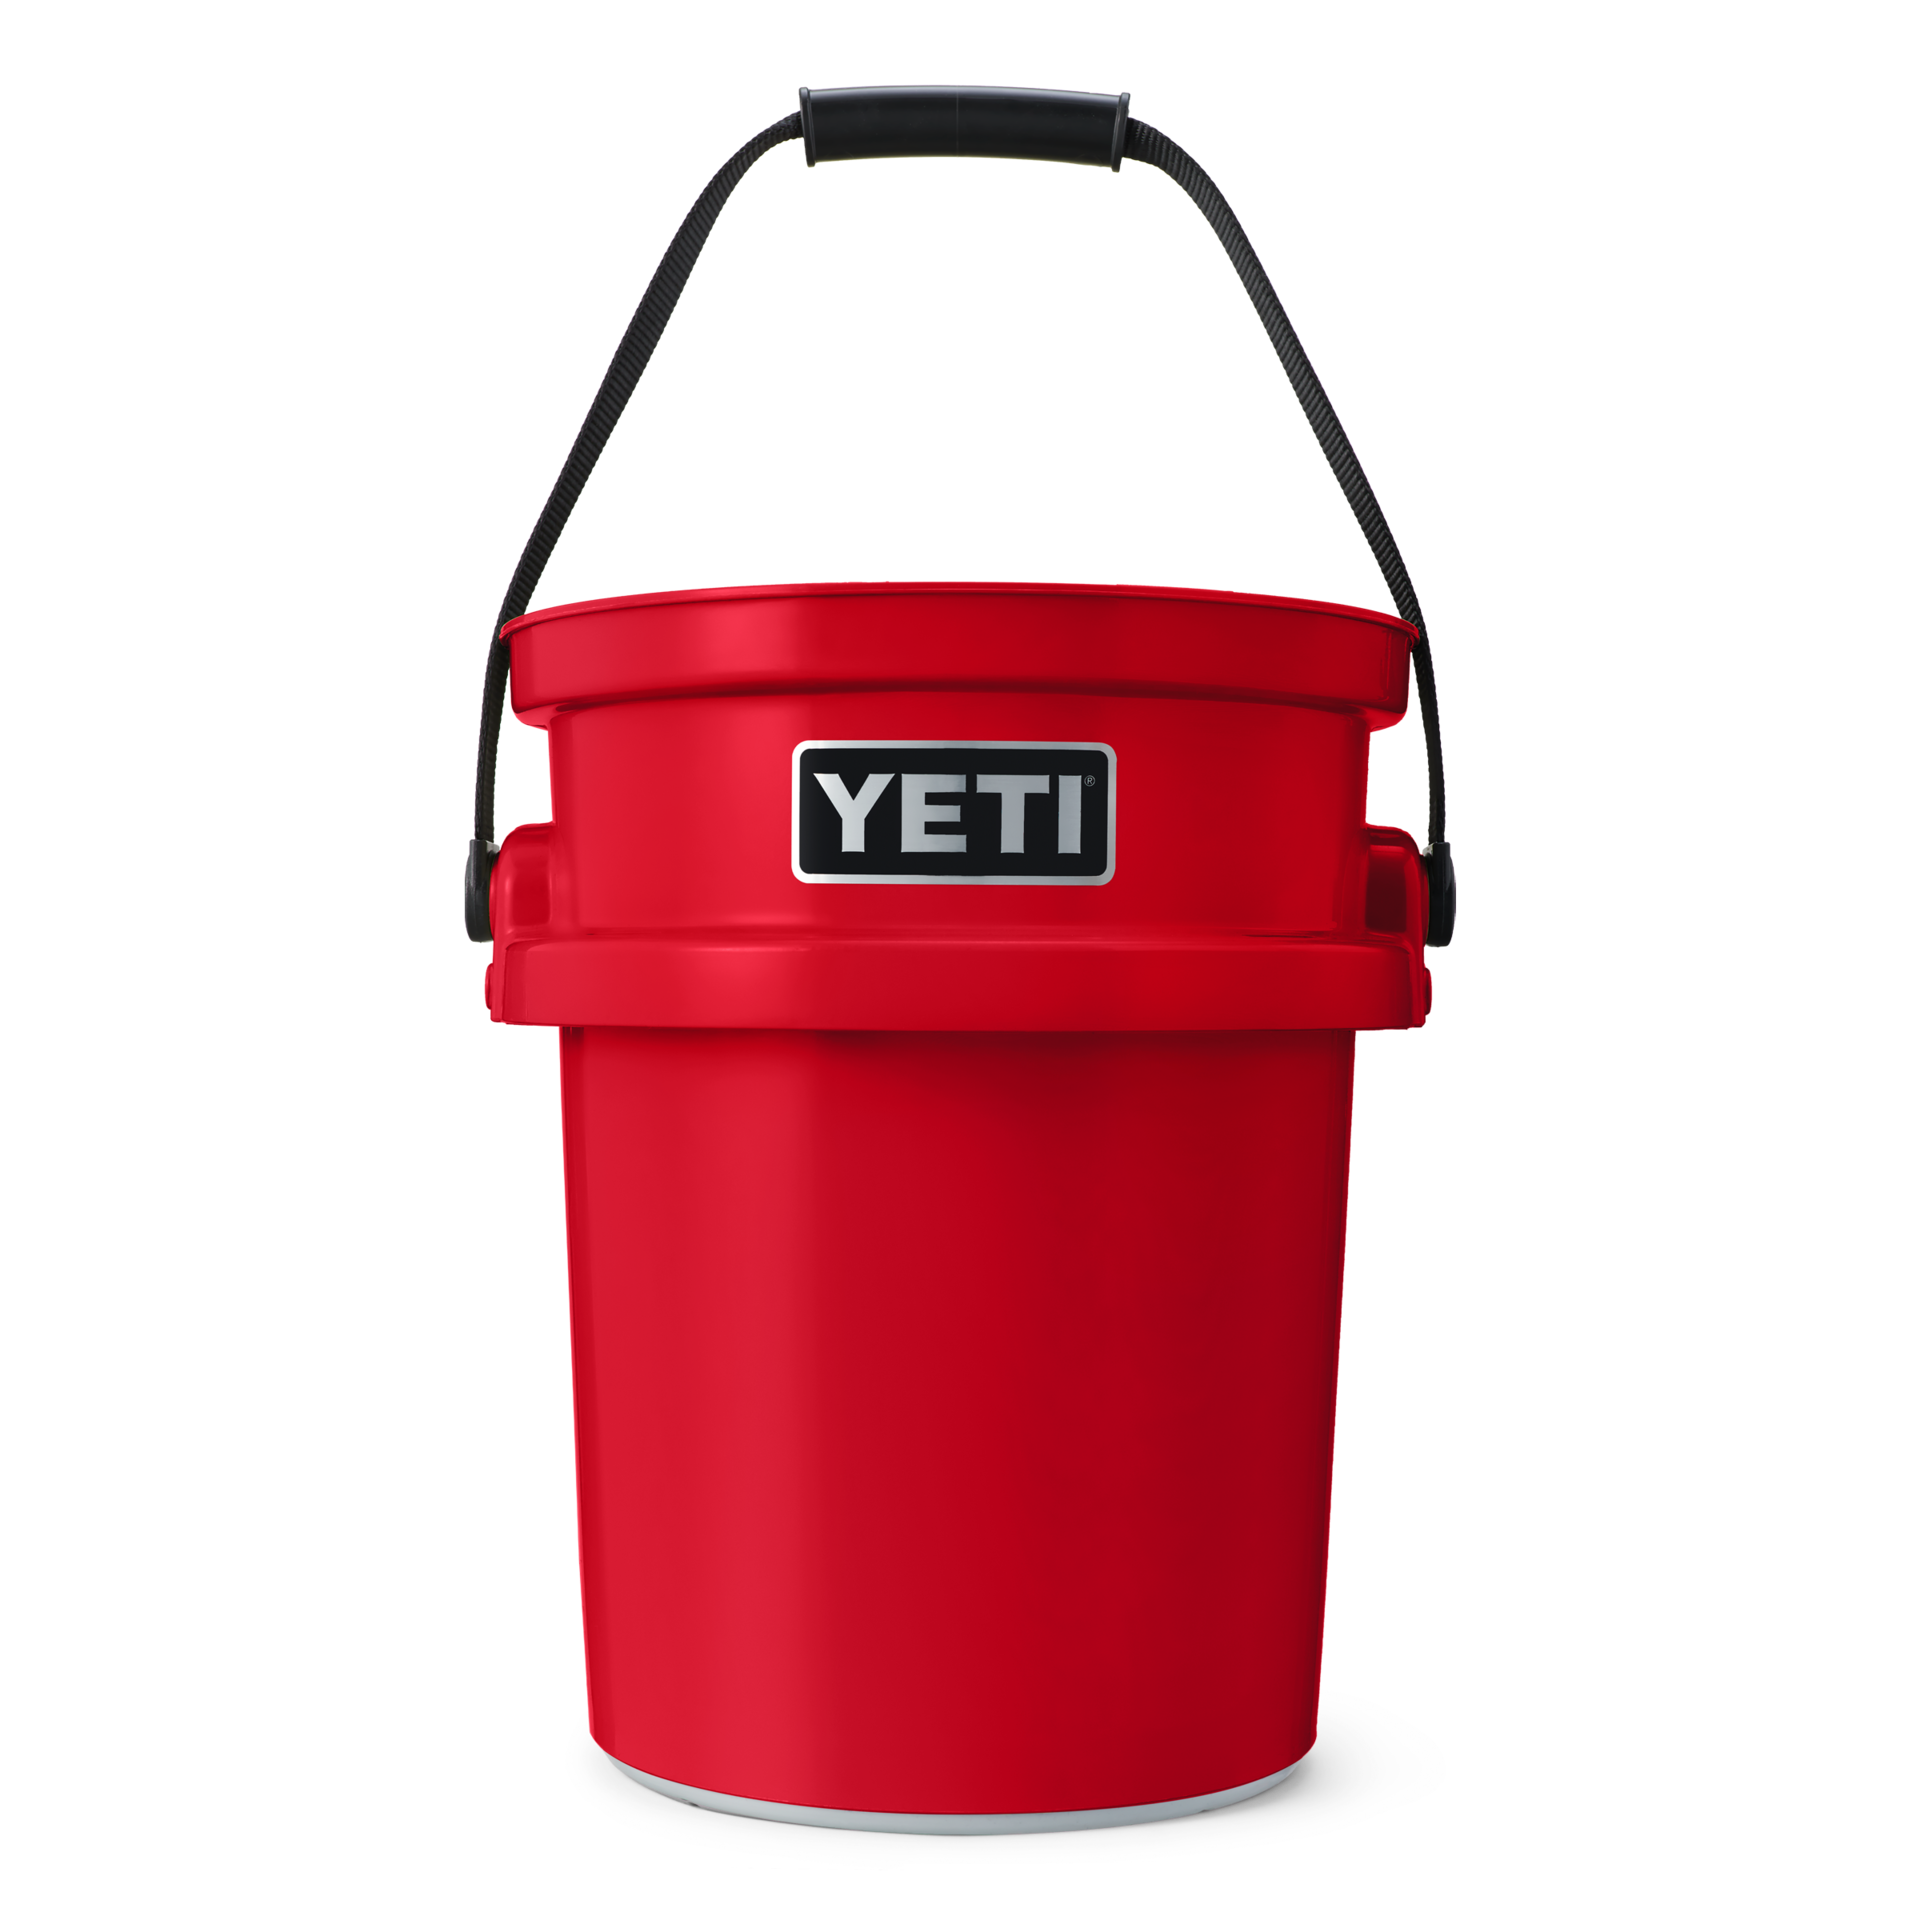 LoadOut 5-Gallon Bucket - Rescue Red